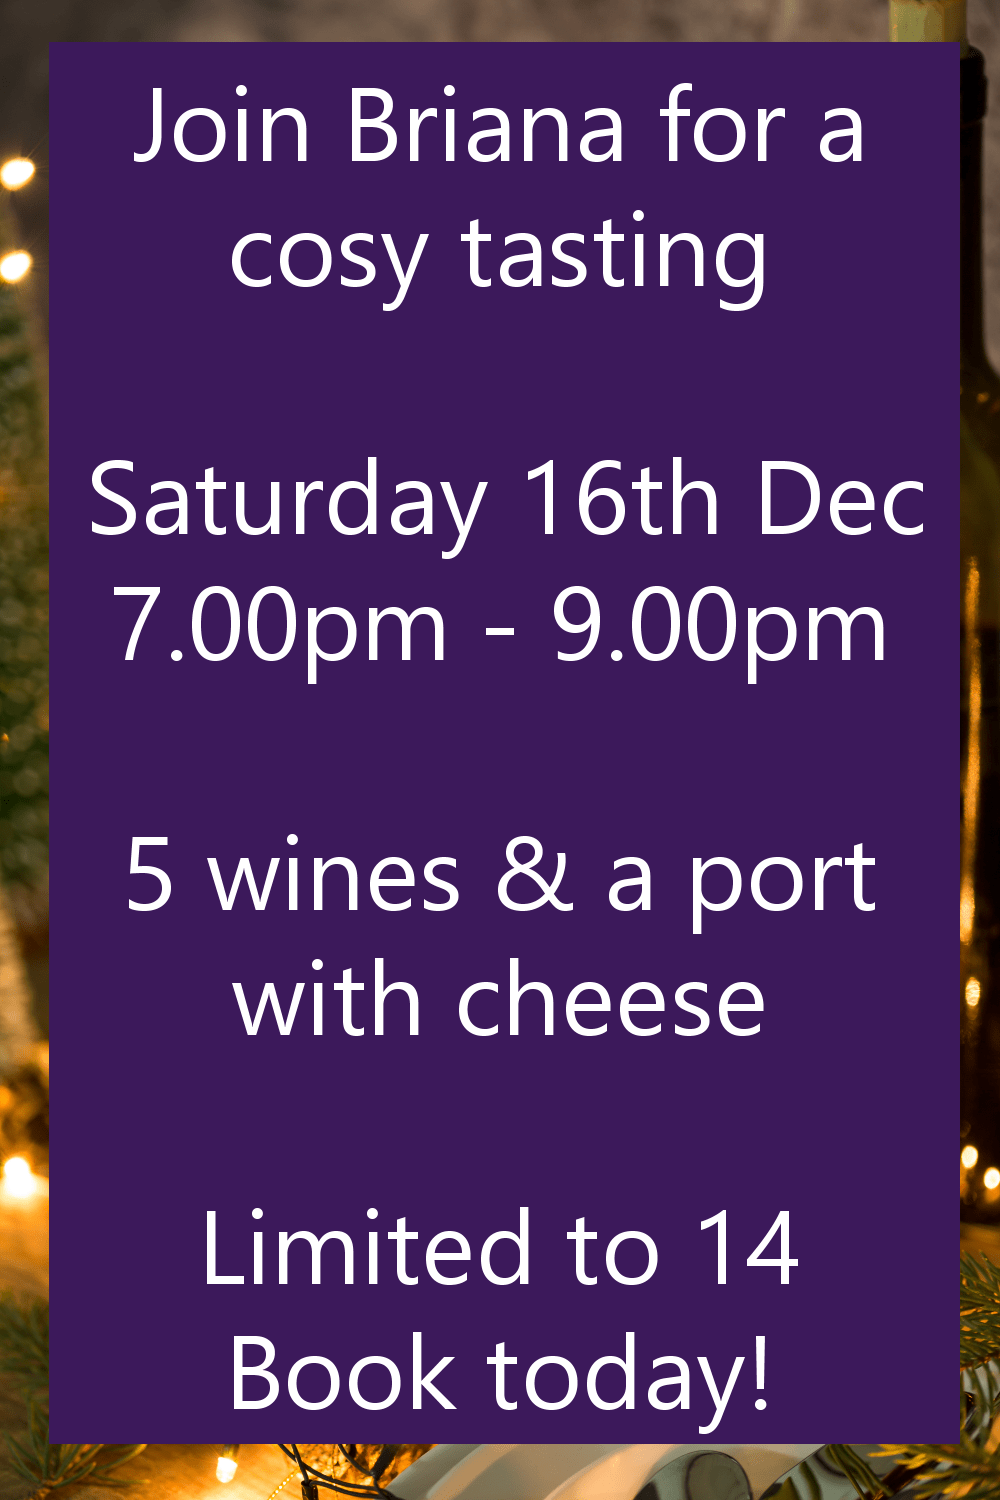 Novel Wines Event Christmas Reds paired with cheeses at Novel Wines shop in Bath, Saturday 16th December at 7pm